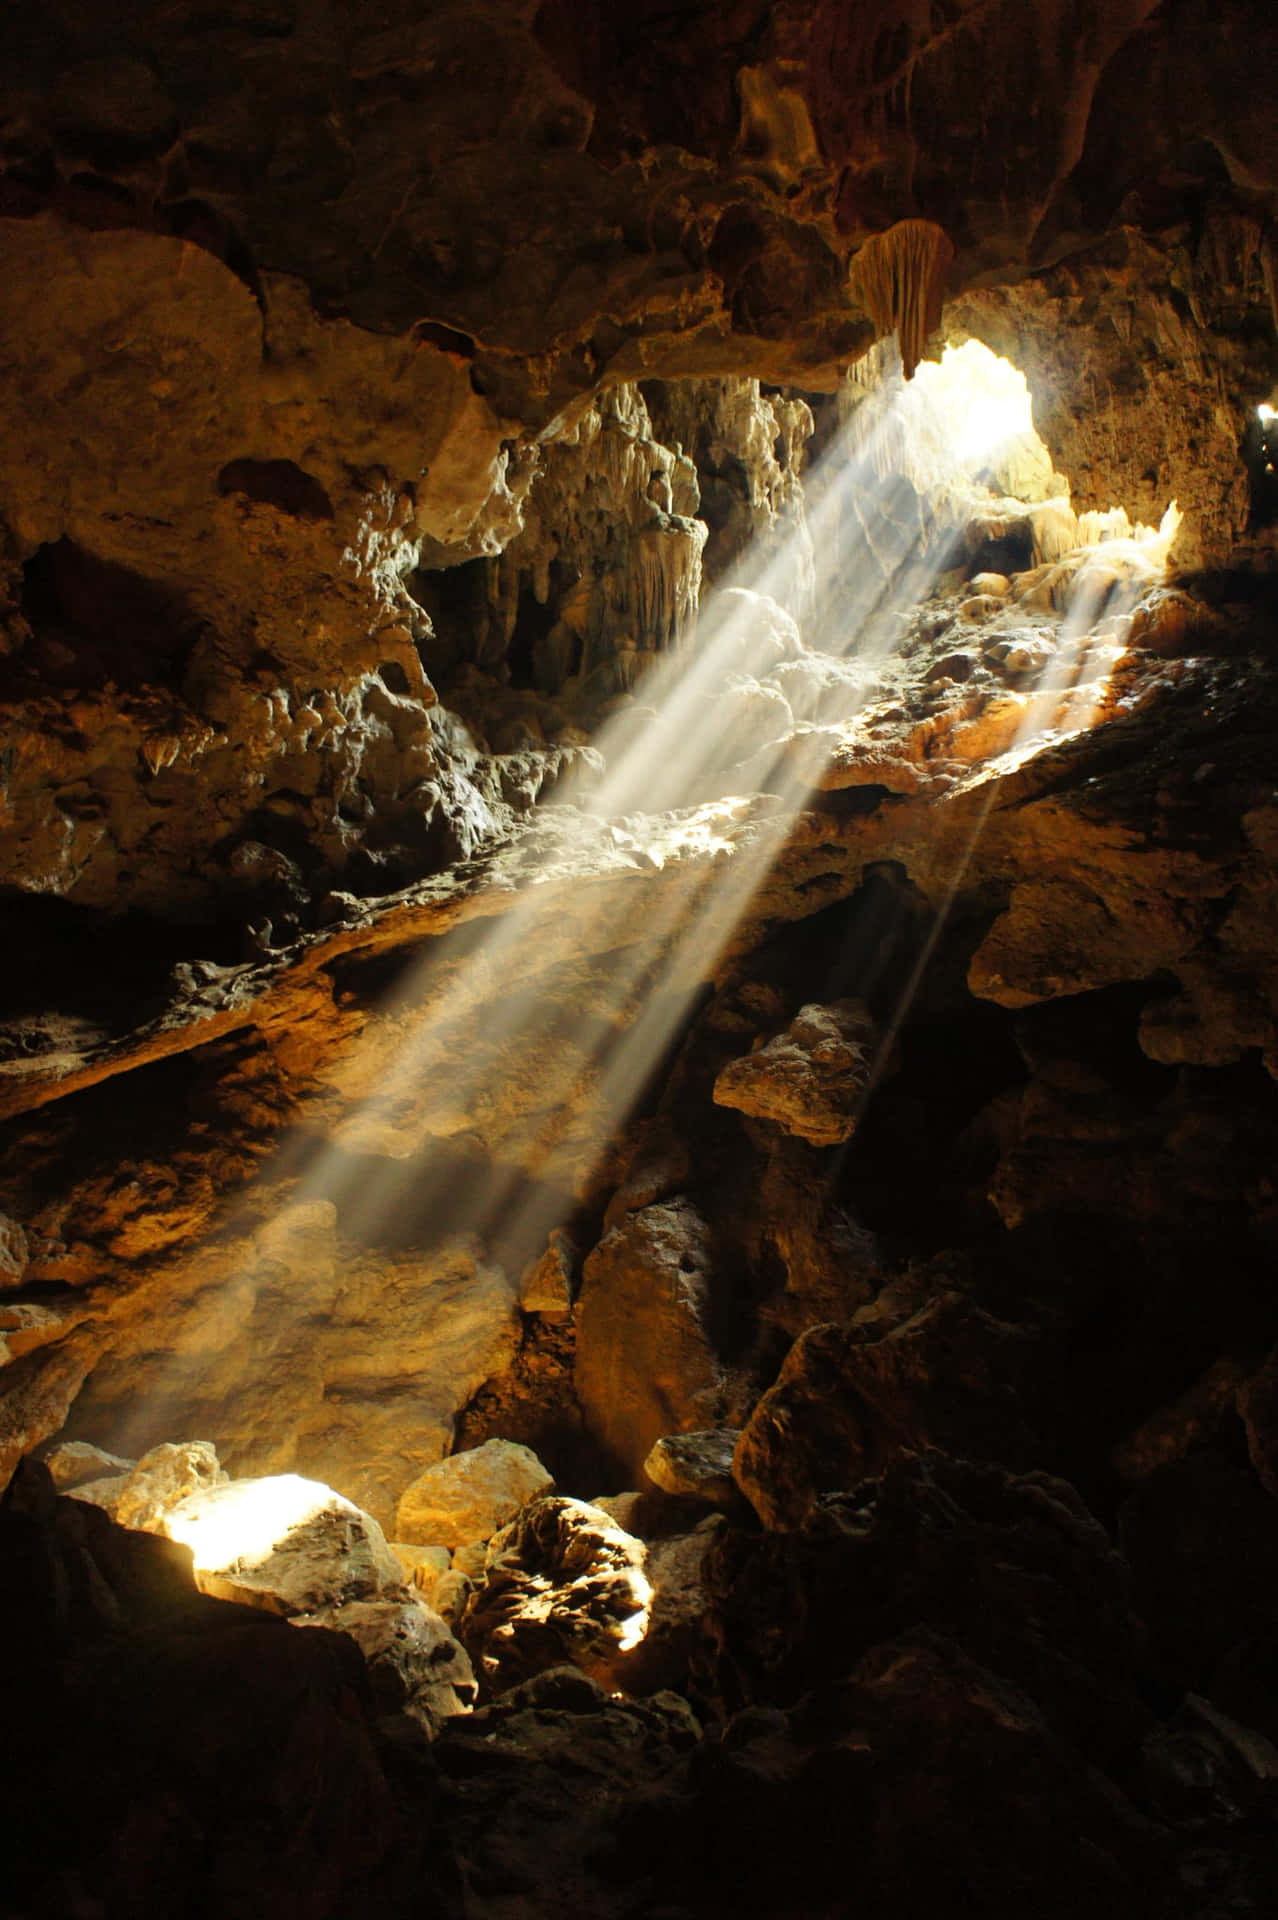 Majestic Cave Interior Bathed in Sunlight